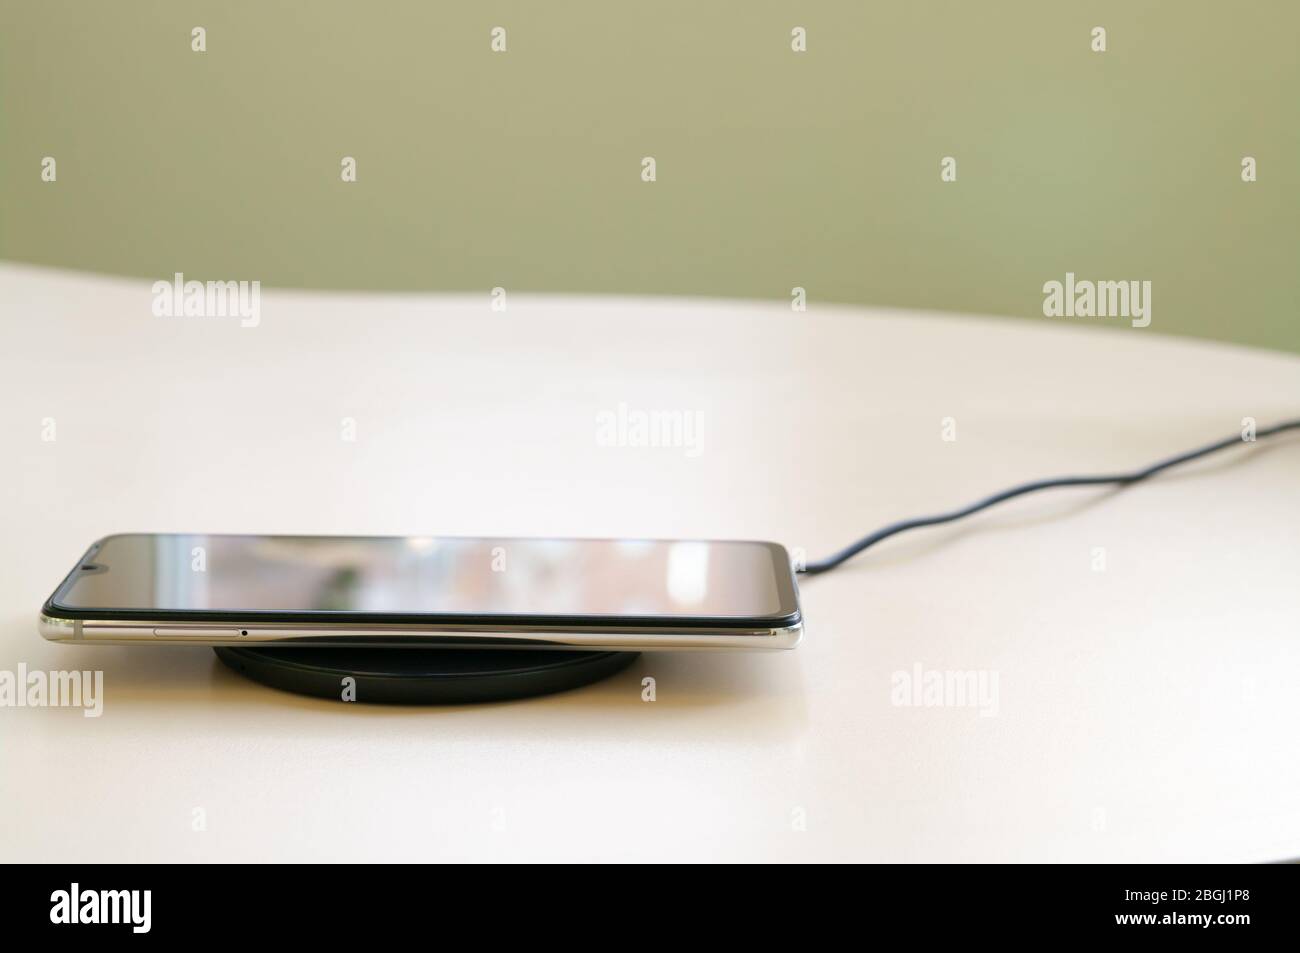 Smartphone wireless charging on induction charger. Wireless charger. Copy space Stock Photo